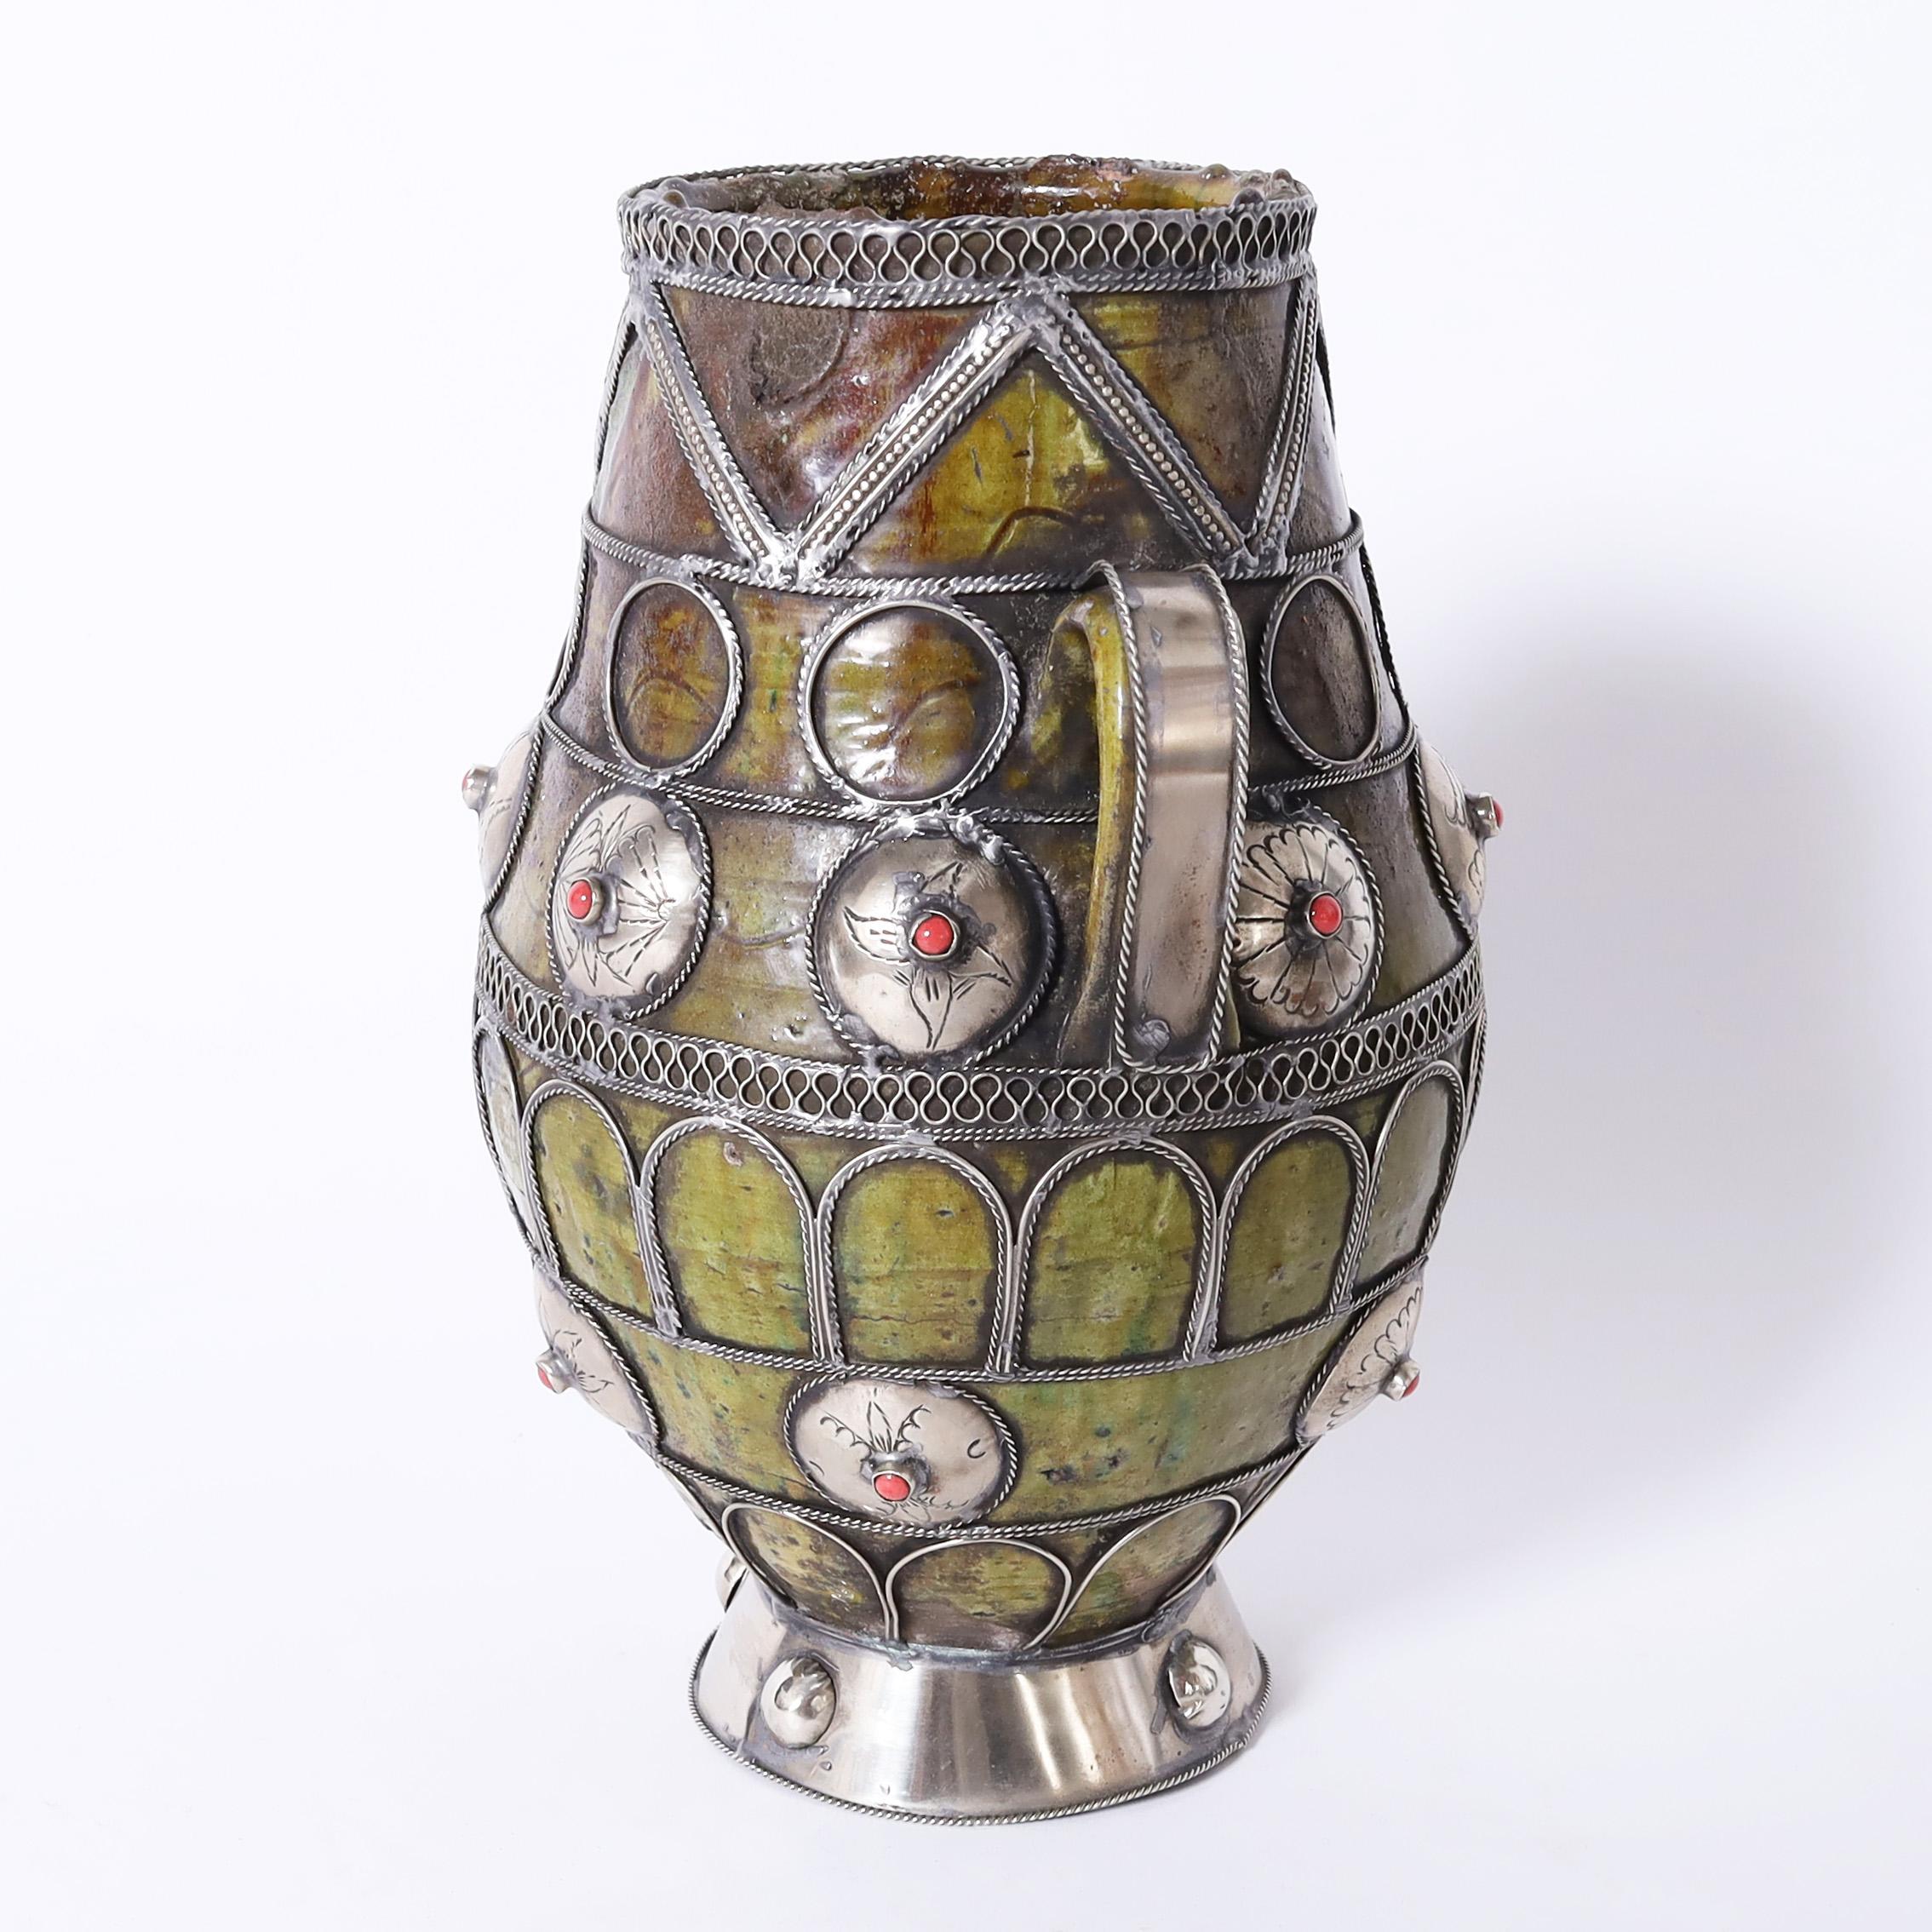 Standout vintage Moroccan vase handcrafted in terracotta in classic form with an olive tone glaze and decorated with jewelry like metalwork.